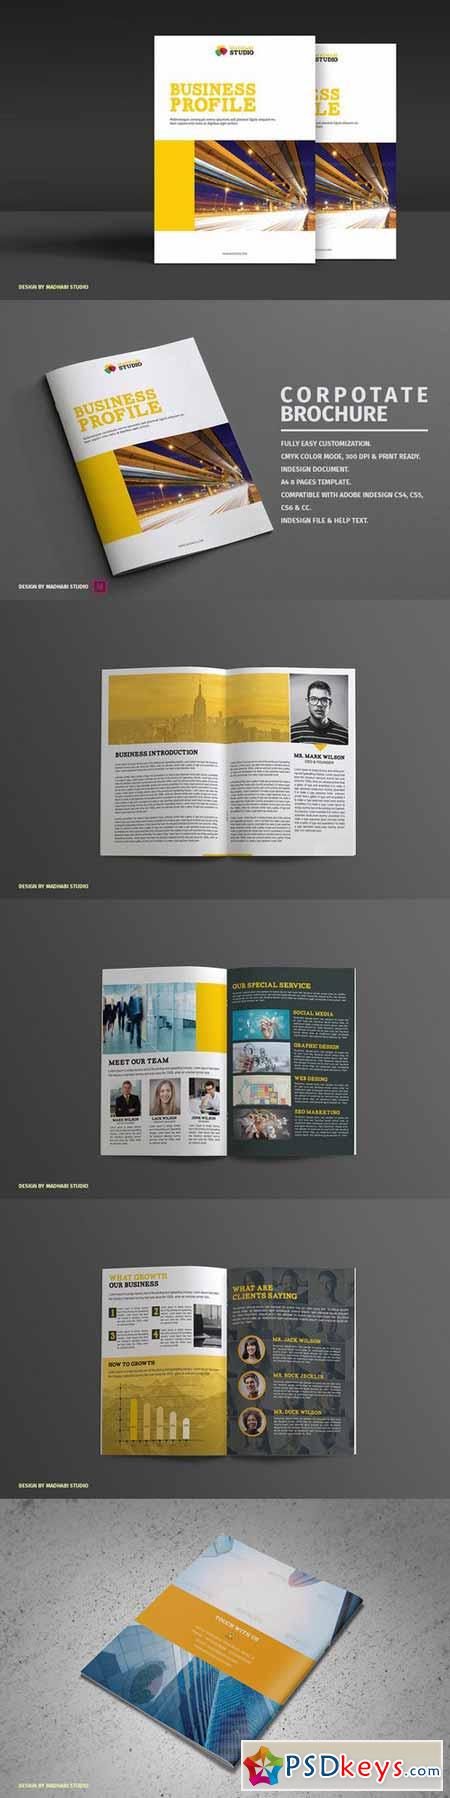 Corporate Brochure 8Pages 423730